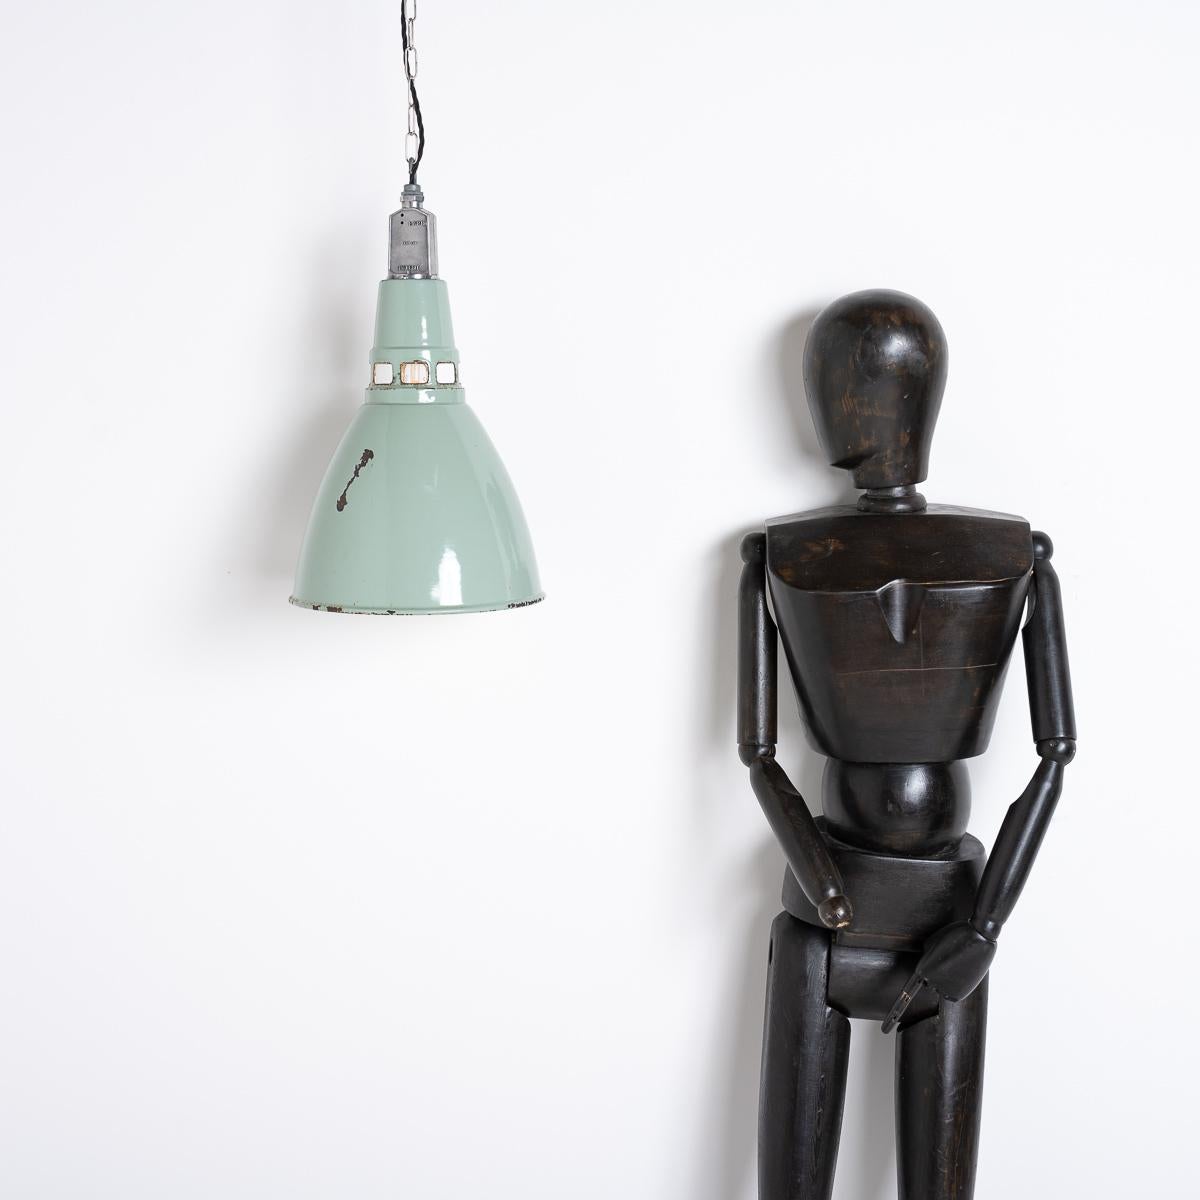 Salvaged industrial factory pendants in a wonderful form and colour manufactured in Great Britain circa 1950 by Thorlux.

Hard to believe these were designed and manufactured for industrial settings, a reminder of the quality and effort that used to